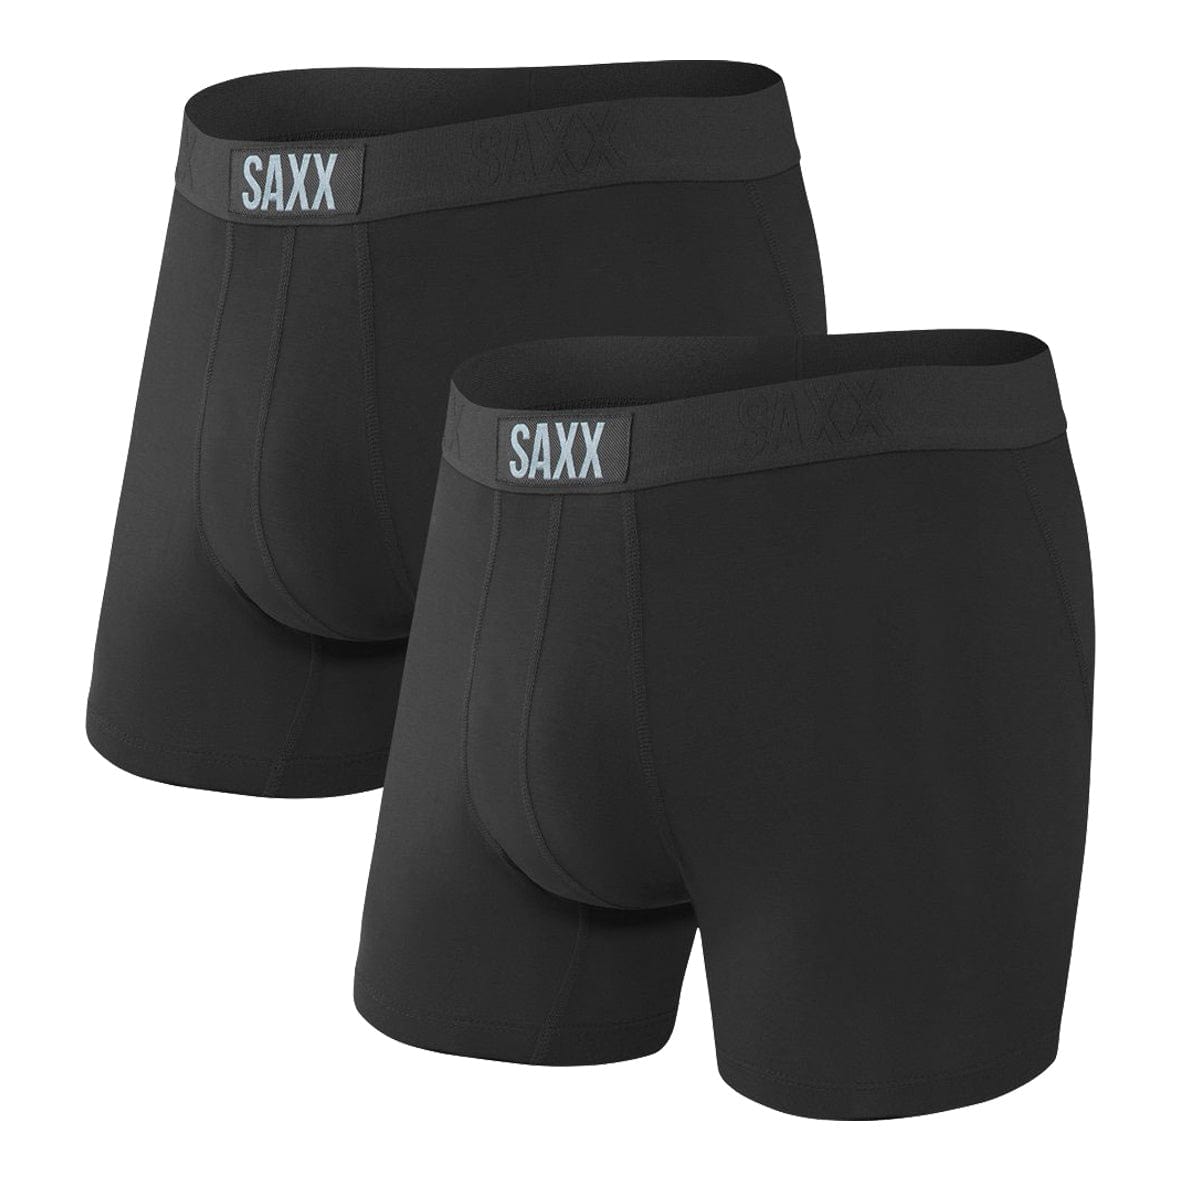 Saxx Vibe Boxers - Black / Black (2 Pack) - The Hockey Shop Source For Sports